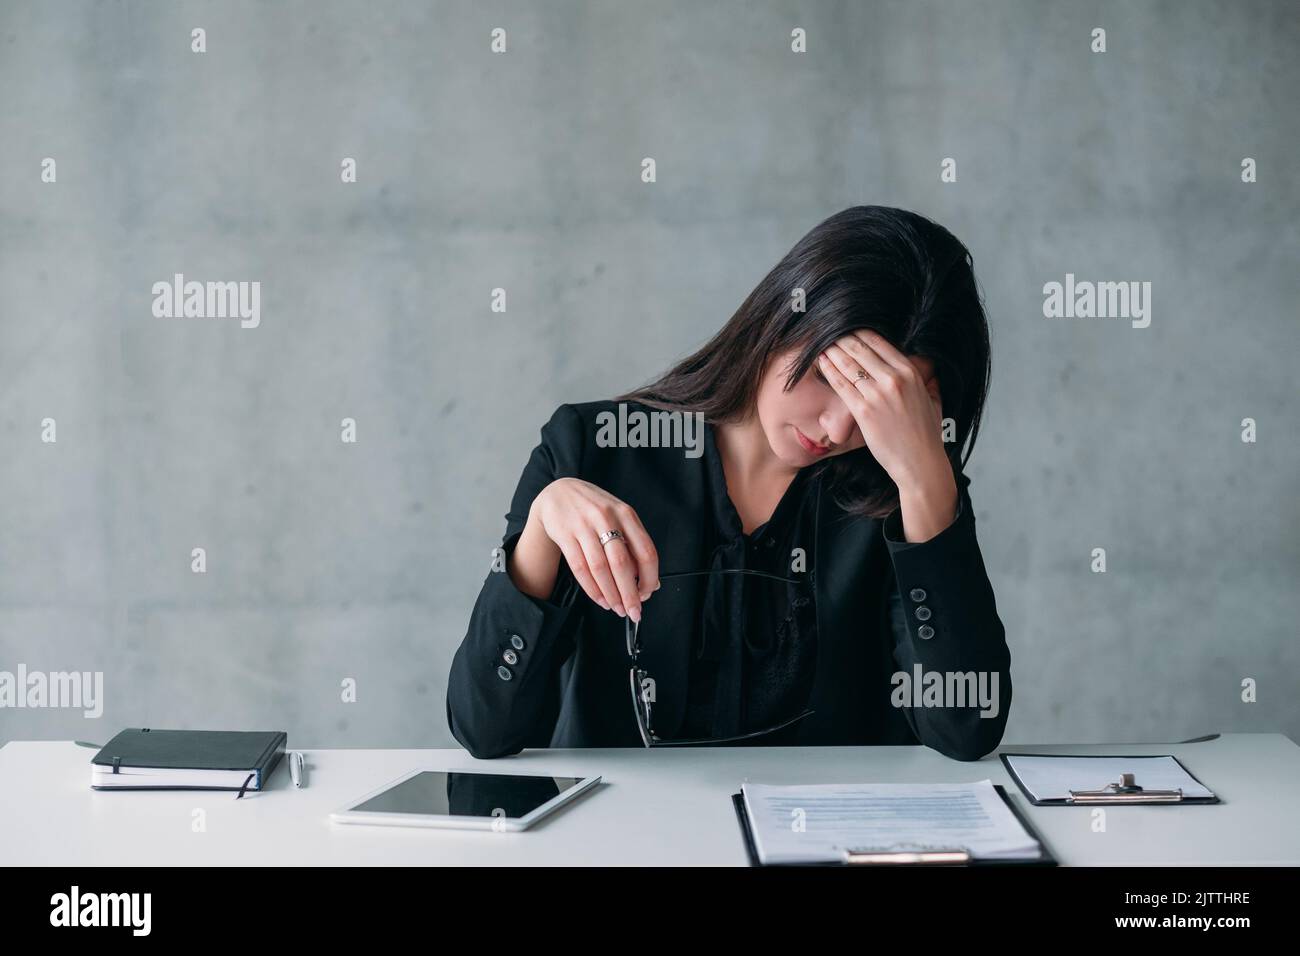 female leader career stressed out business woman Stock Photo